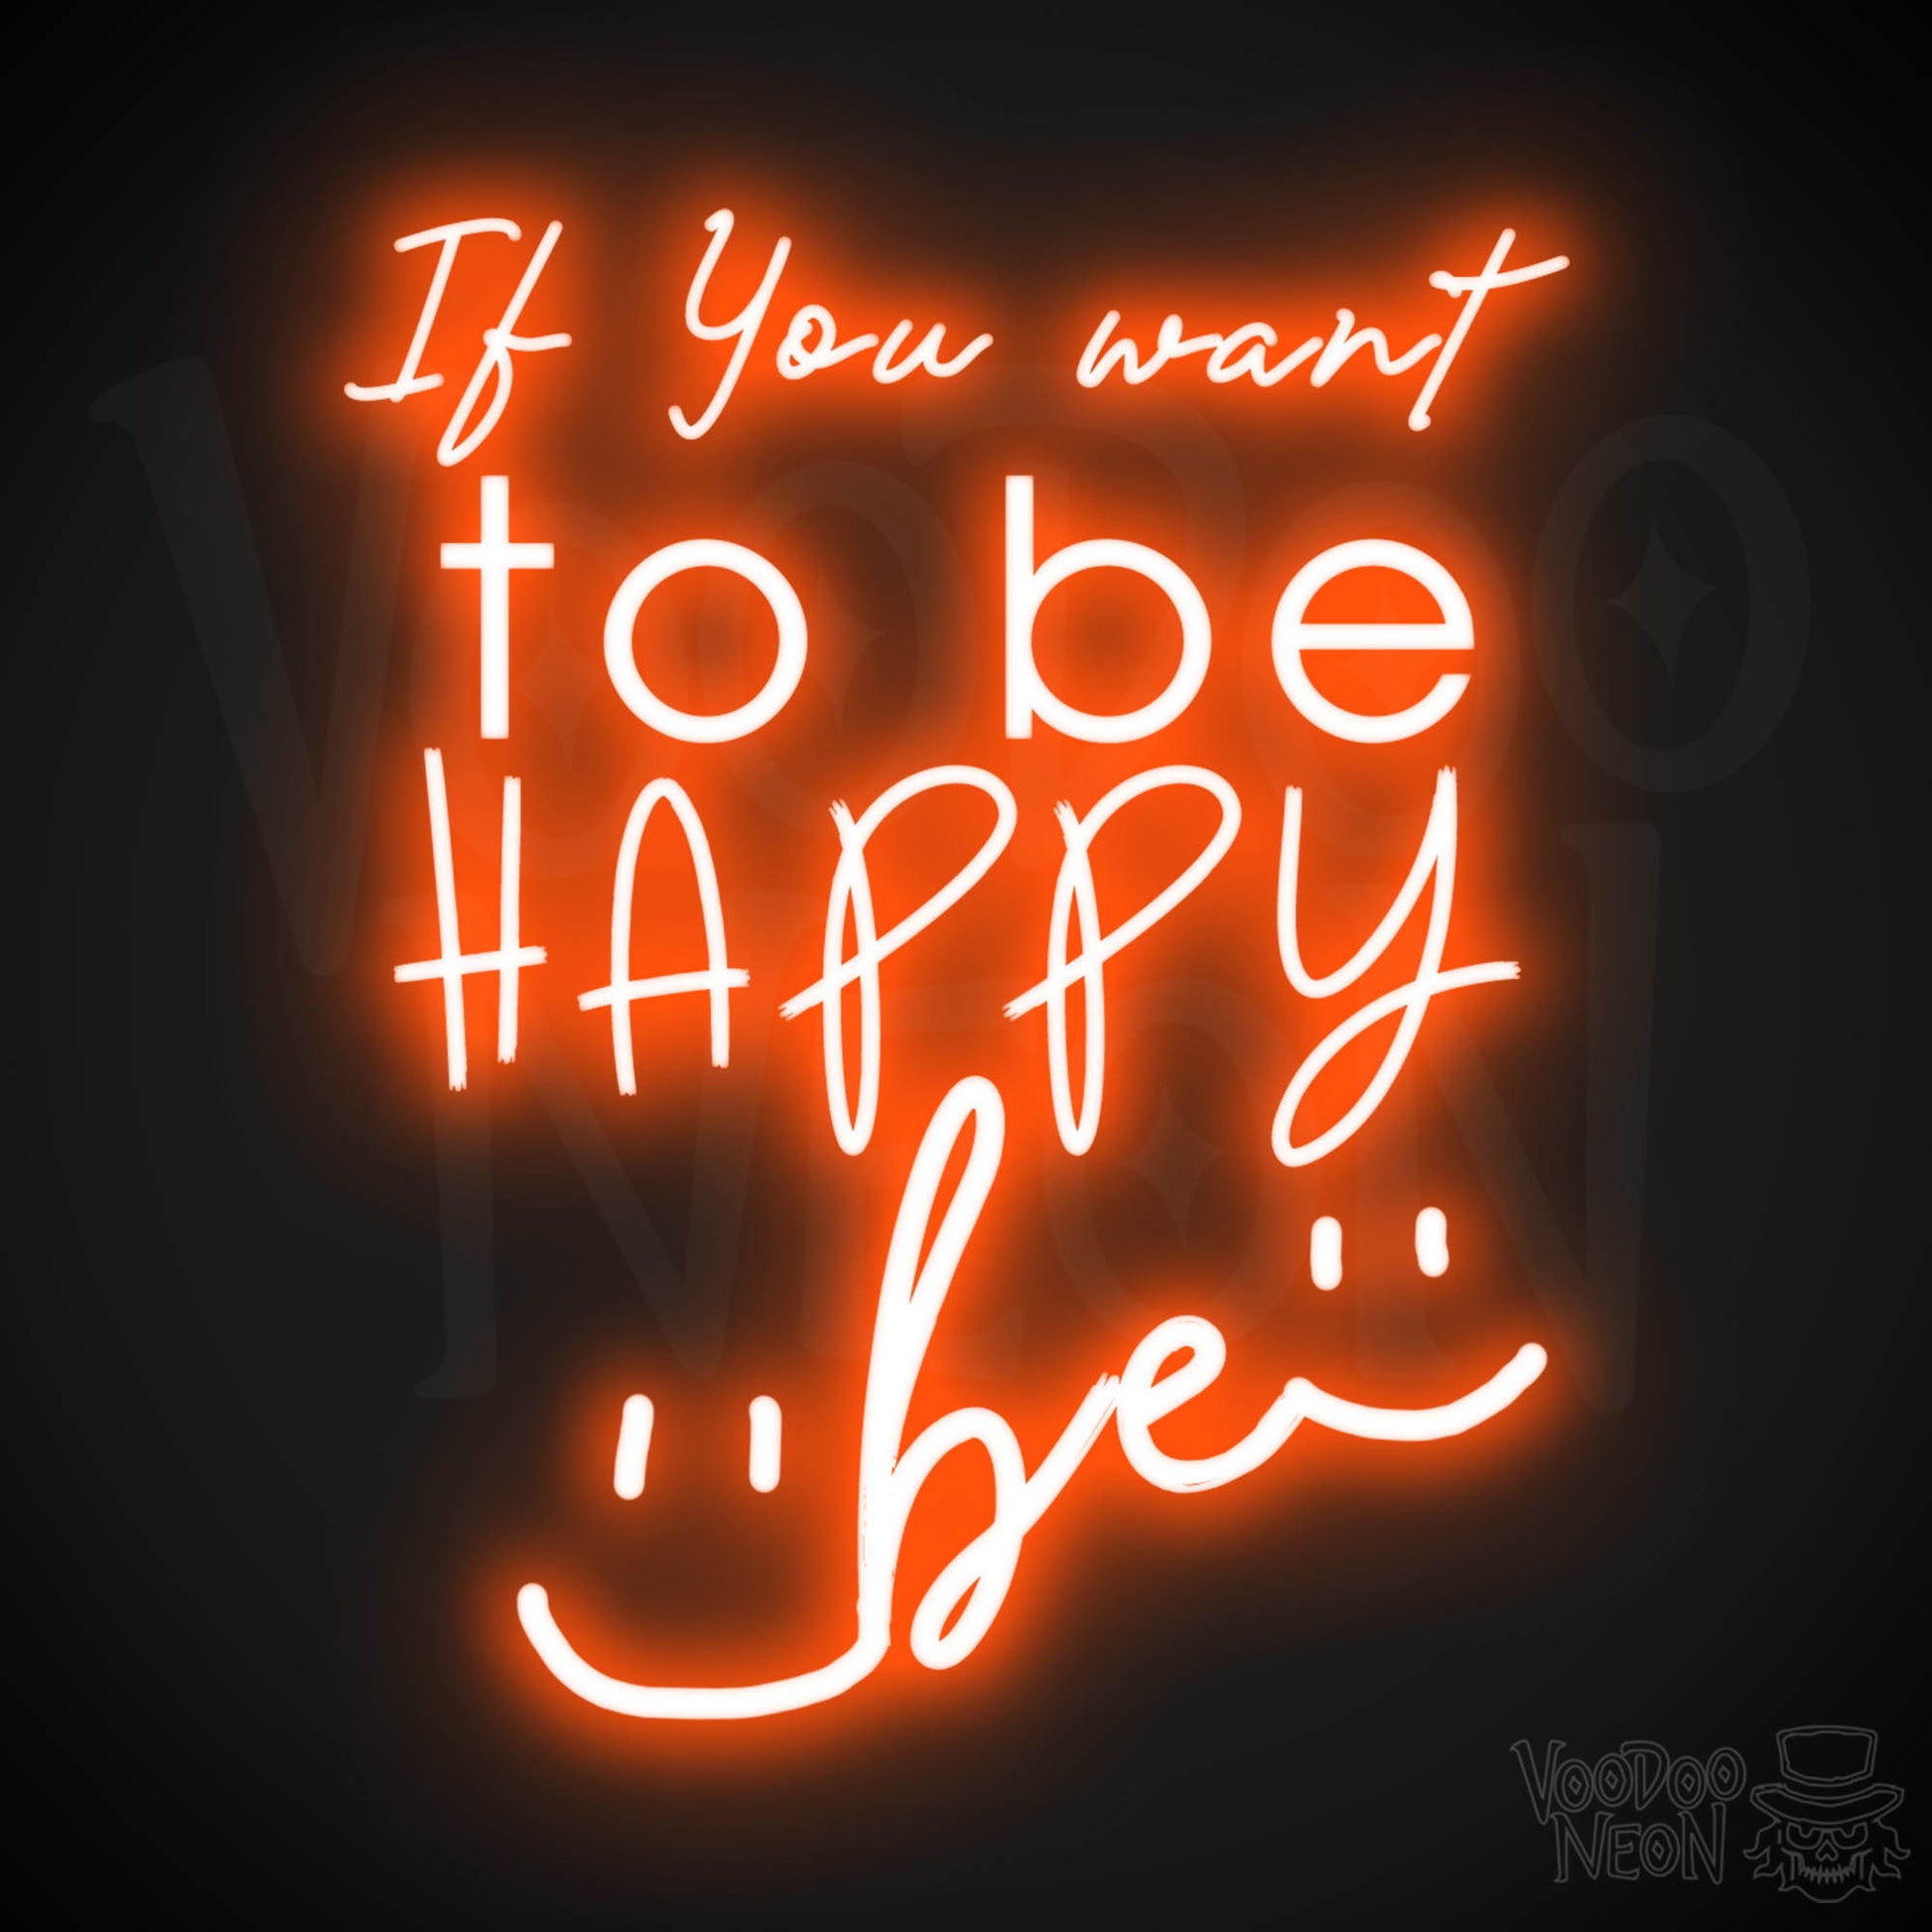 If You Want To Be Happy Be Neon Sign - Neon If You Want To Be Happy Be Sign - LED Neon Wall Art - Color Orange